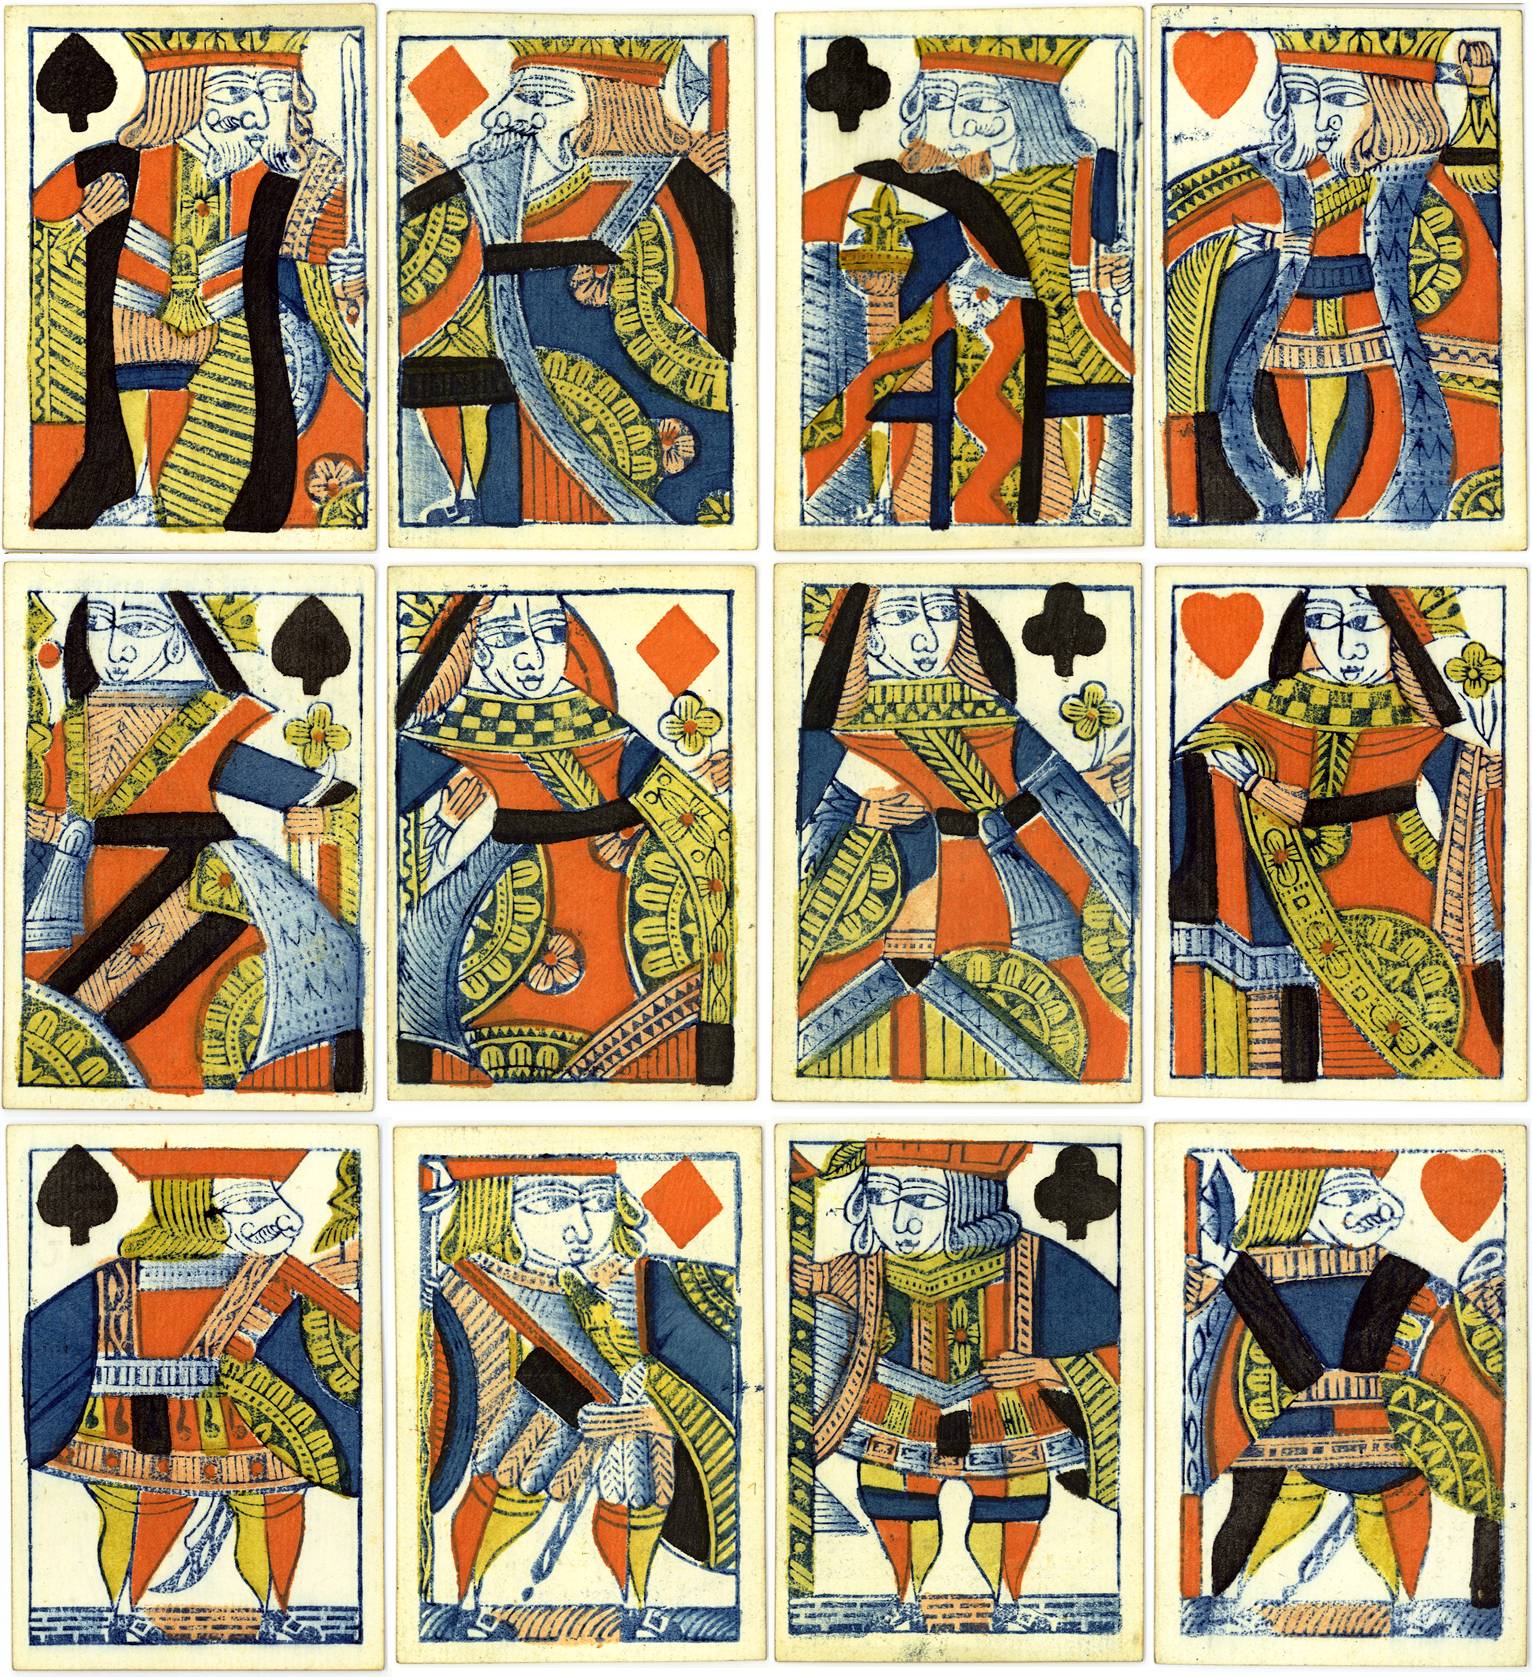 Standard English playing cards manufactured by Gibson Hunt & Son, 1801-1803